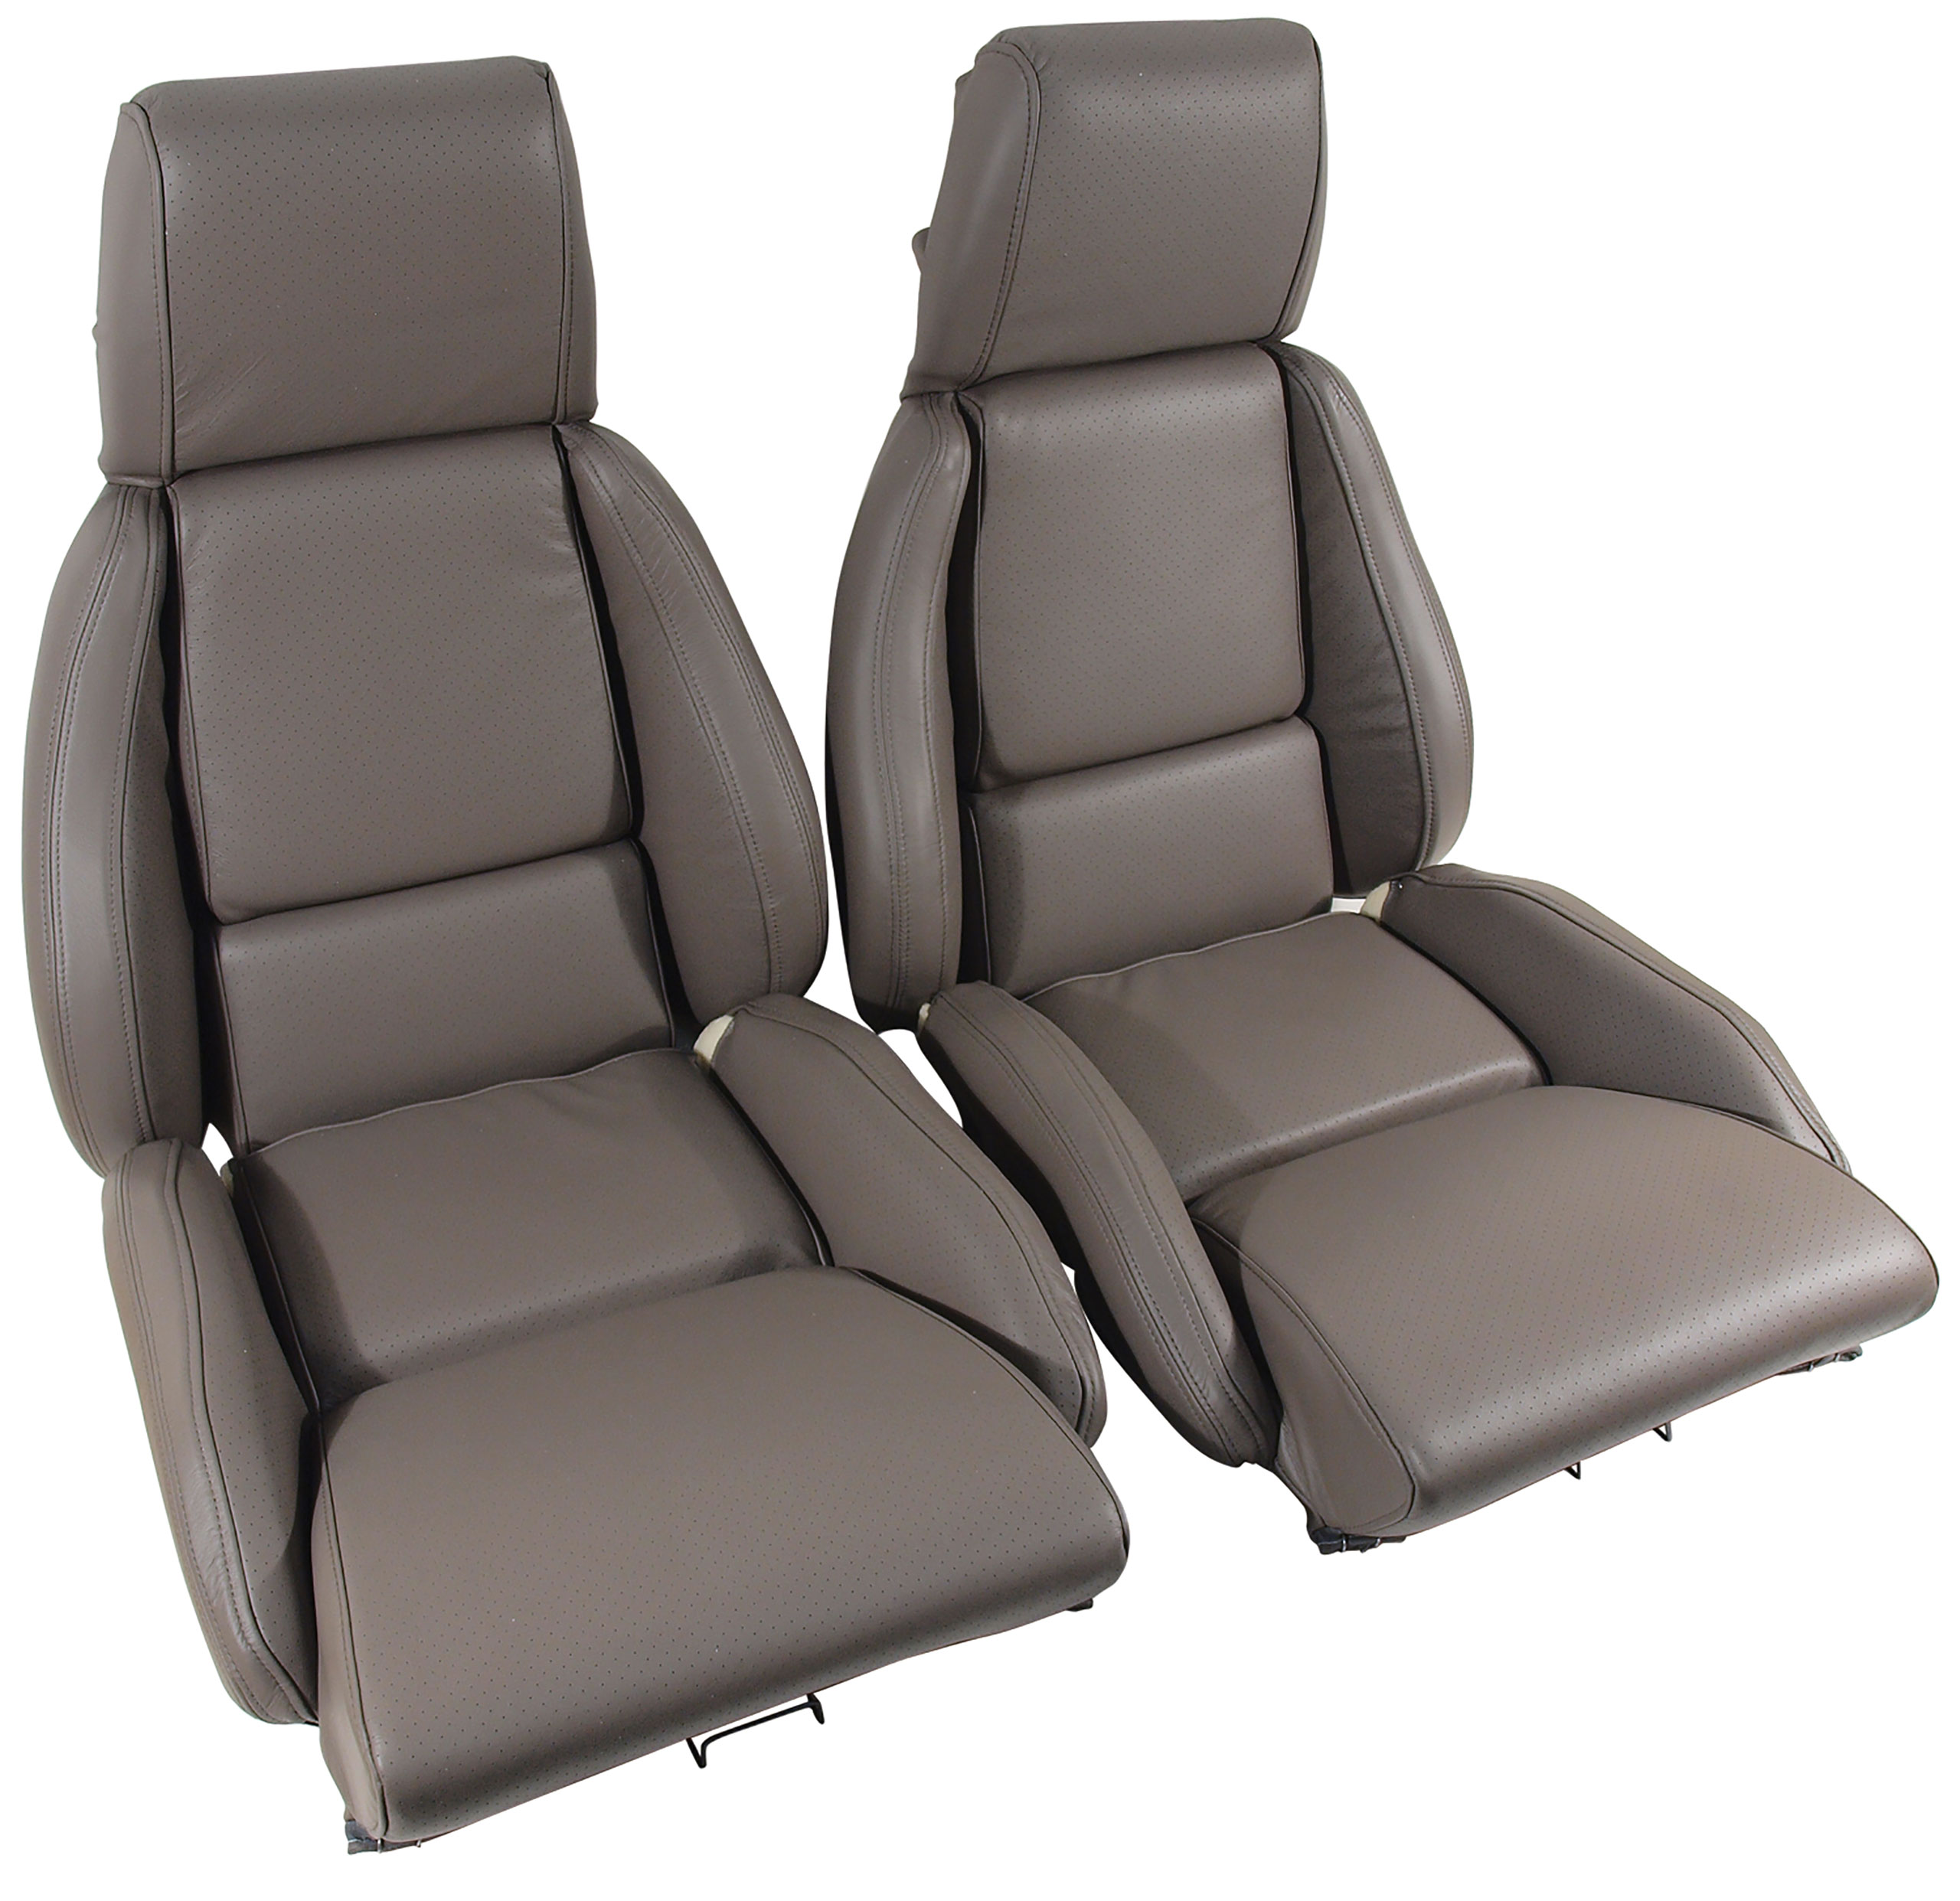 1988 C4 Corvette Mounted Leather Seat Covers Gray Standard